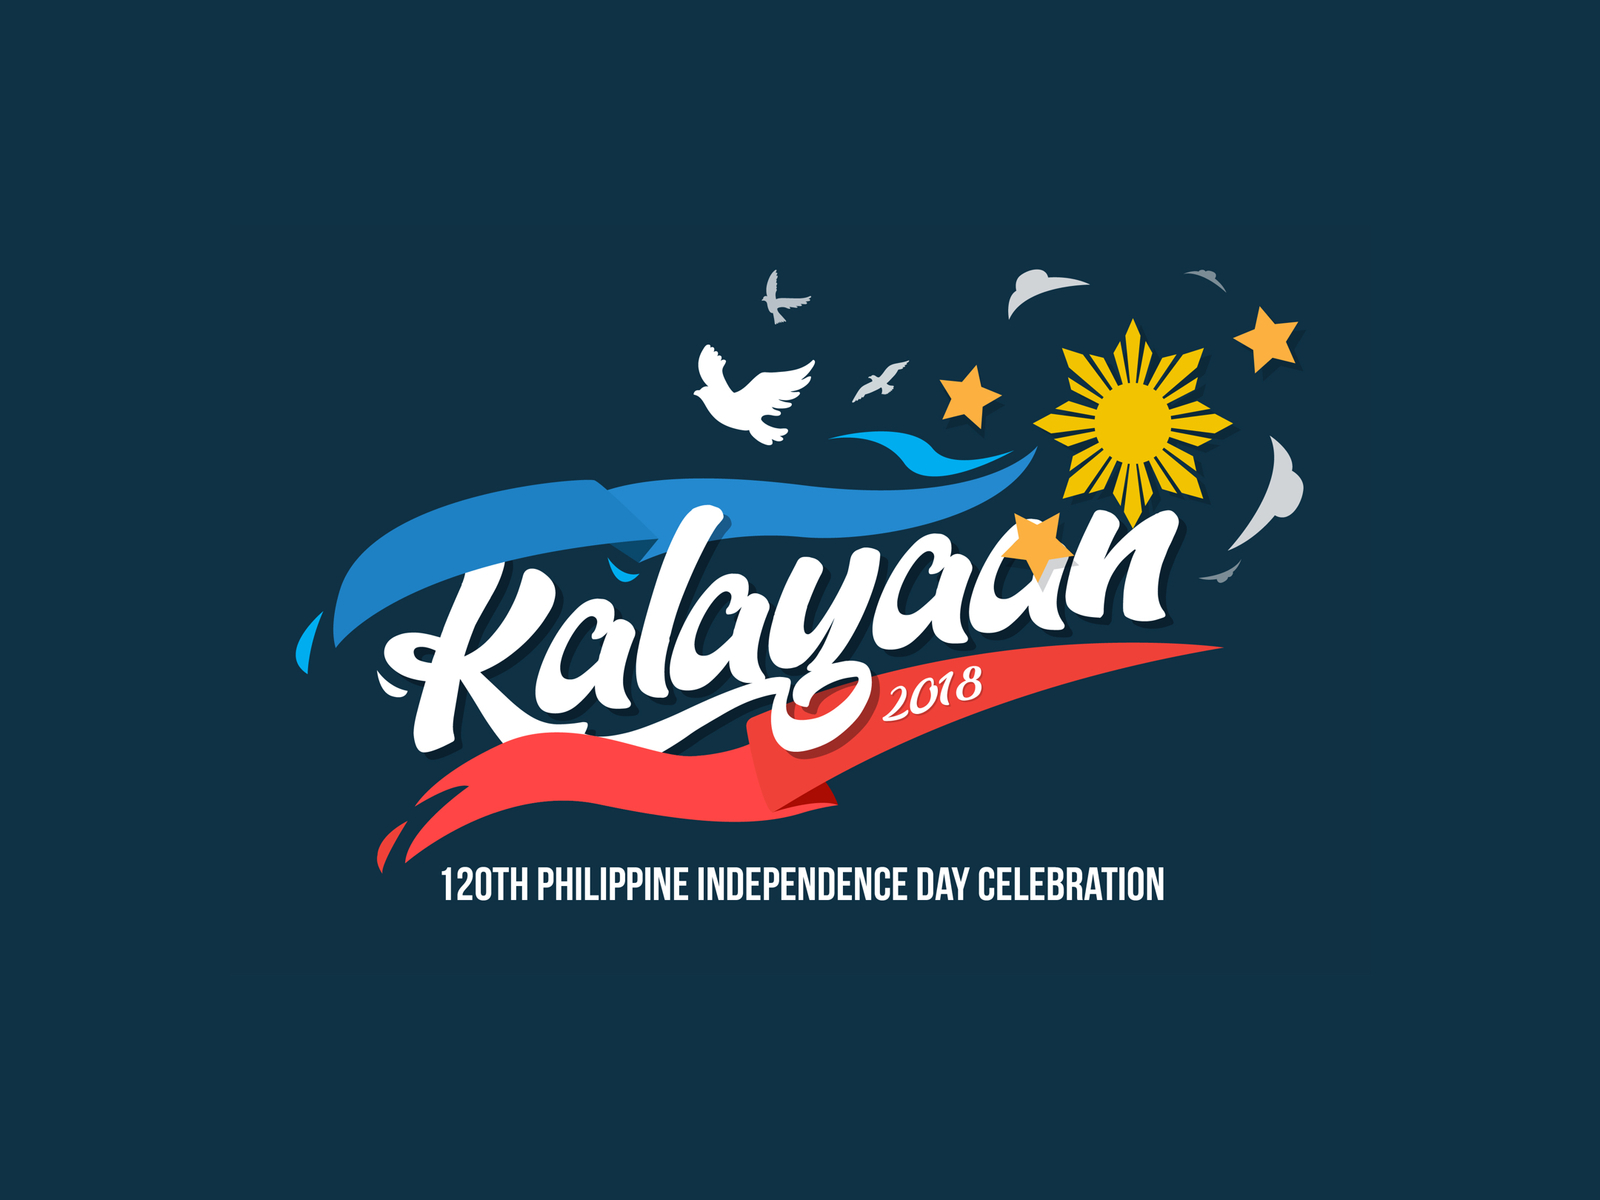 Kalayaan 2018: 120th Philippine Independence Day Celebration by Ricardo